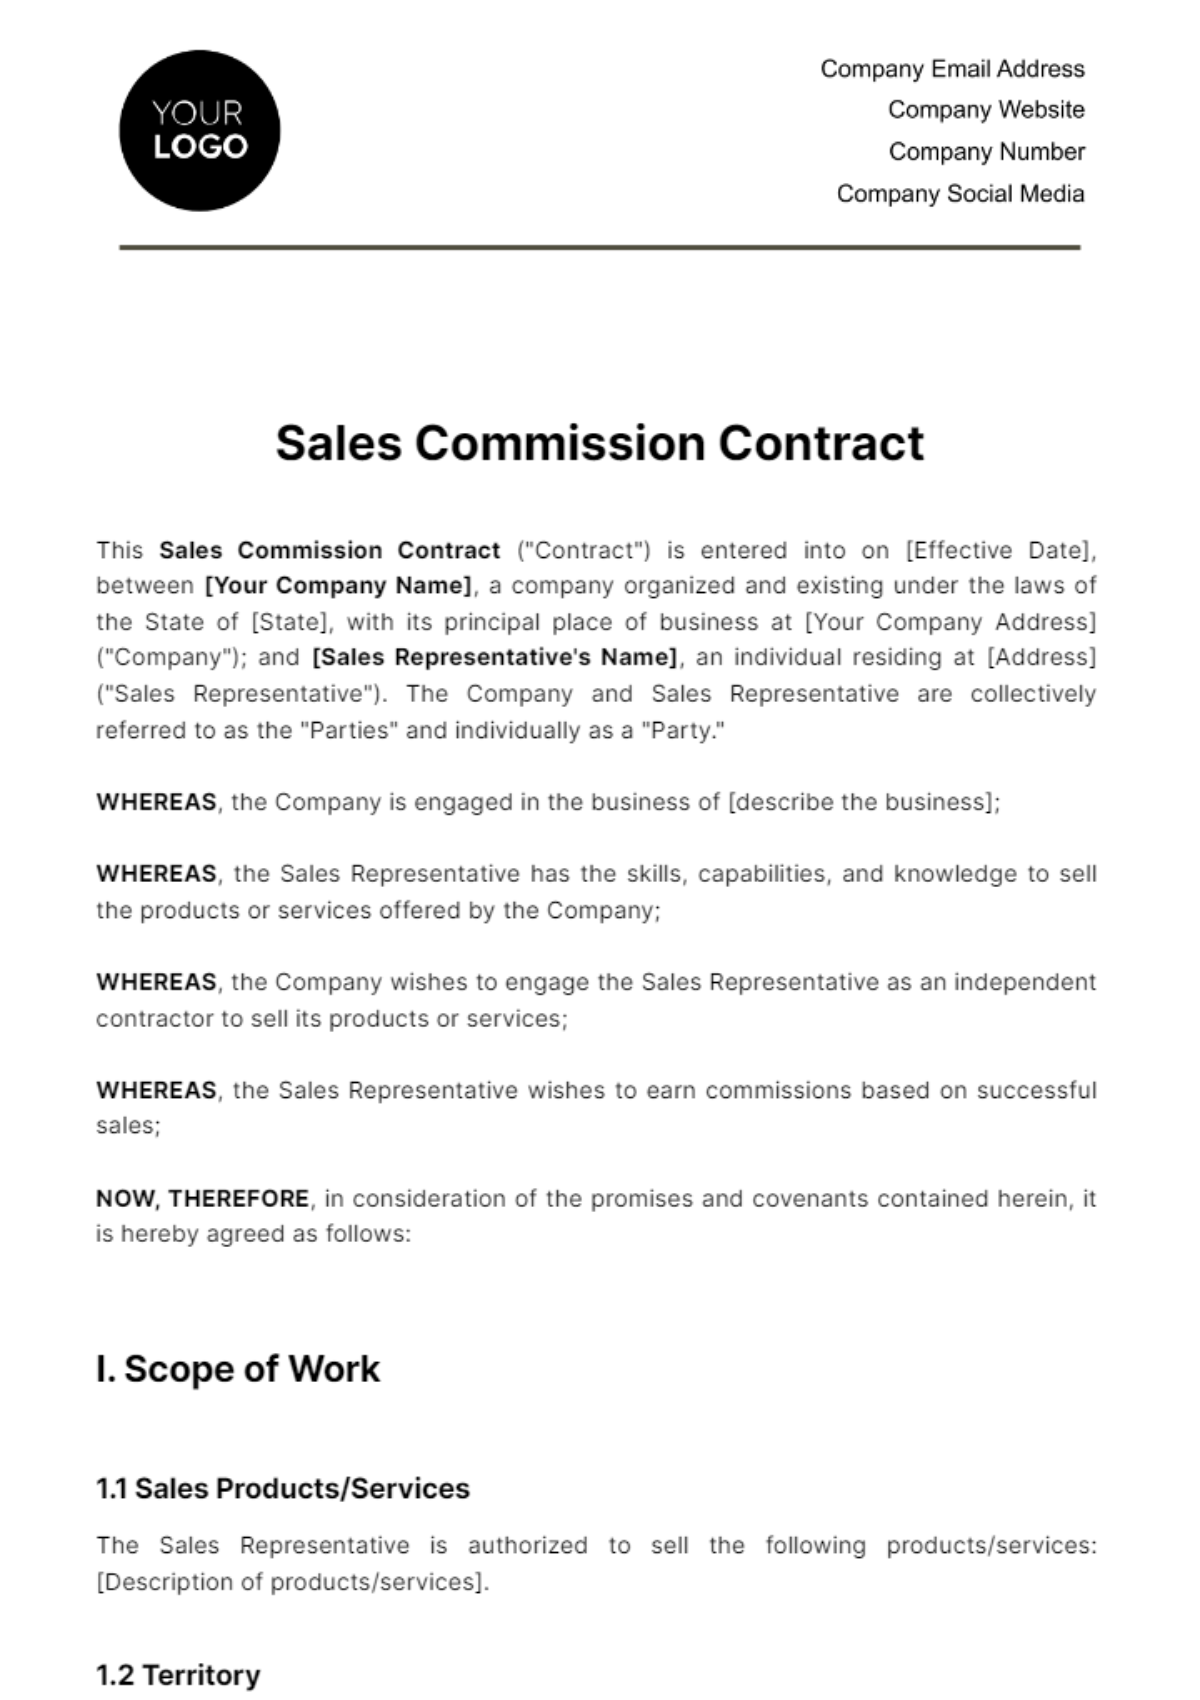 Free Sales Commission Contract HR Template